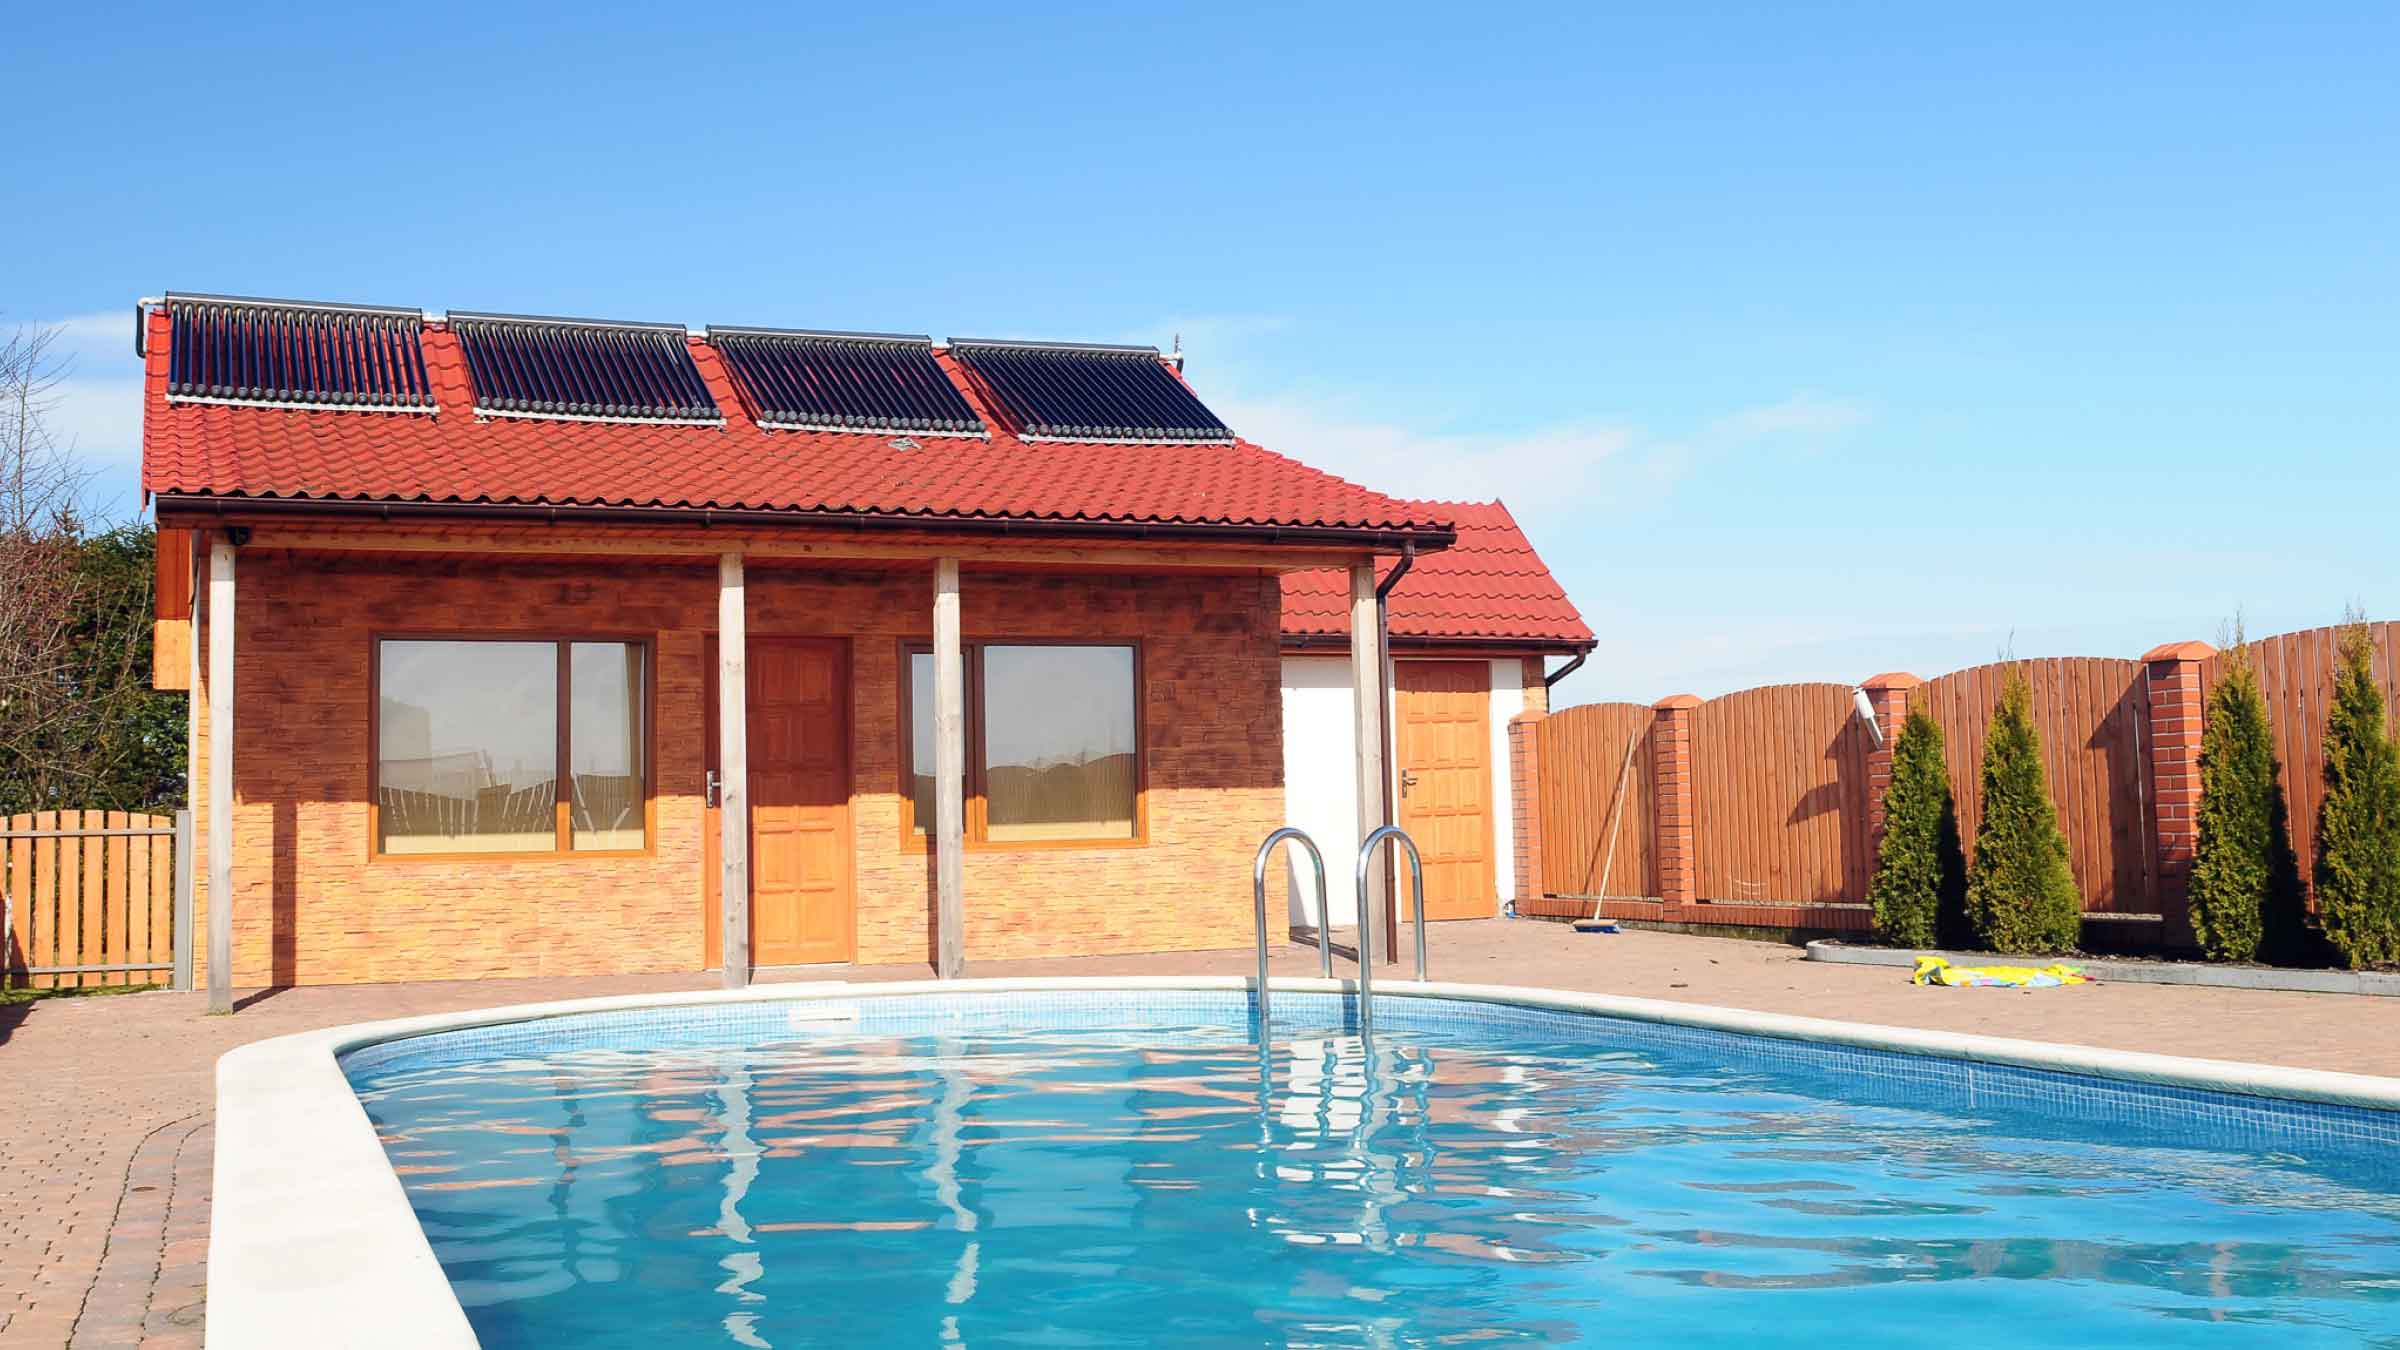 Small house with four solar panels on its roof sits at end of pool.